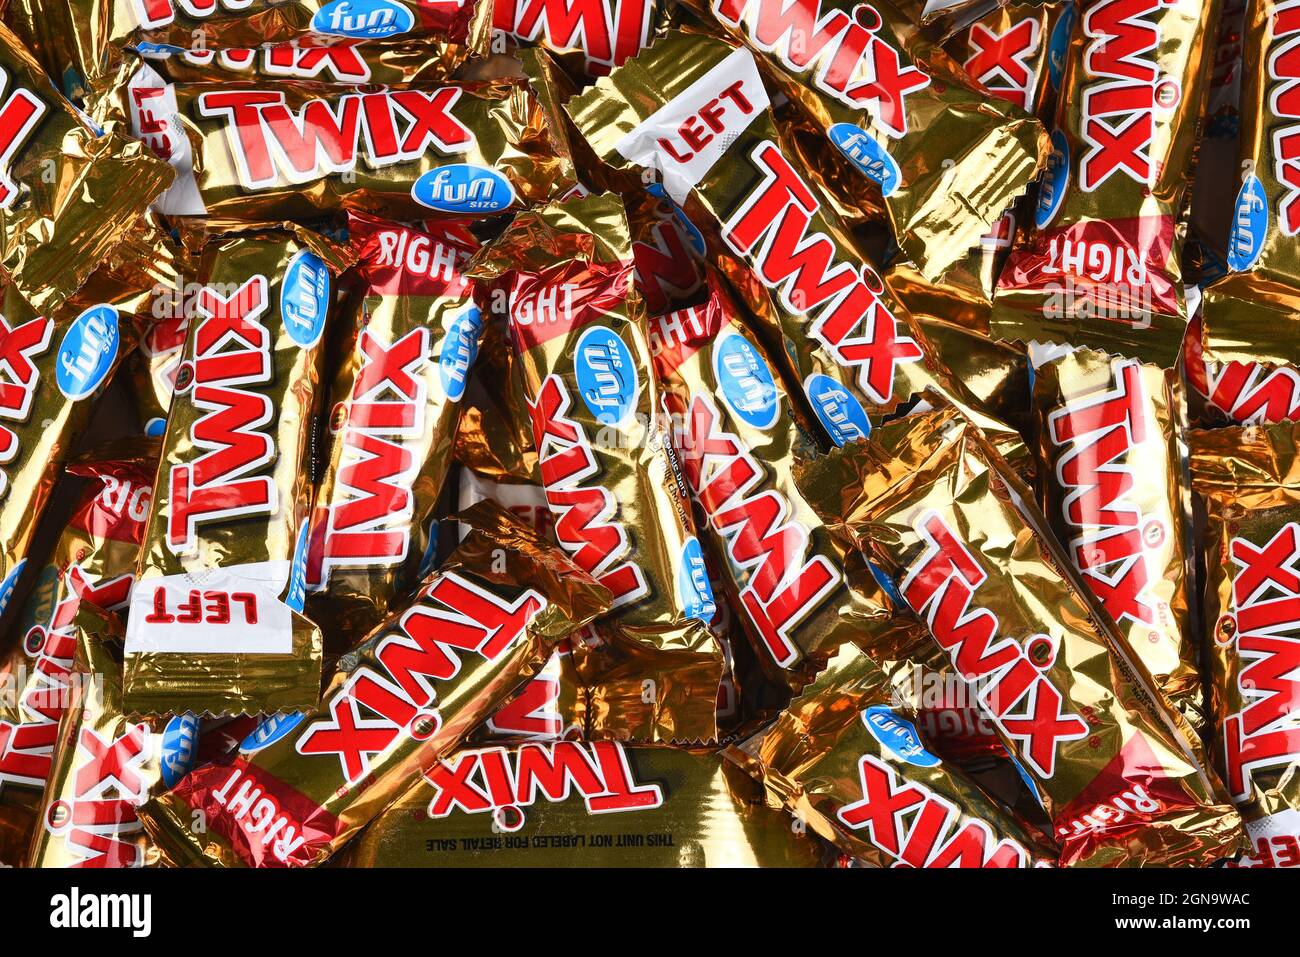 IRVINE, CALIFORNIA - 23 SEPT 2021: A large pile of Twix Fun Size Candy Bars for Halloween, Stock Photo